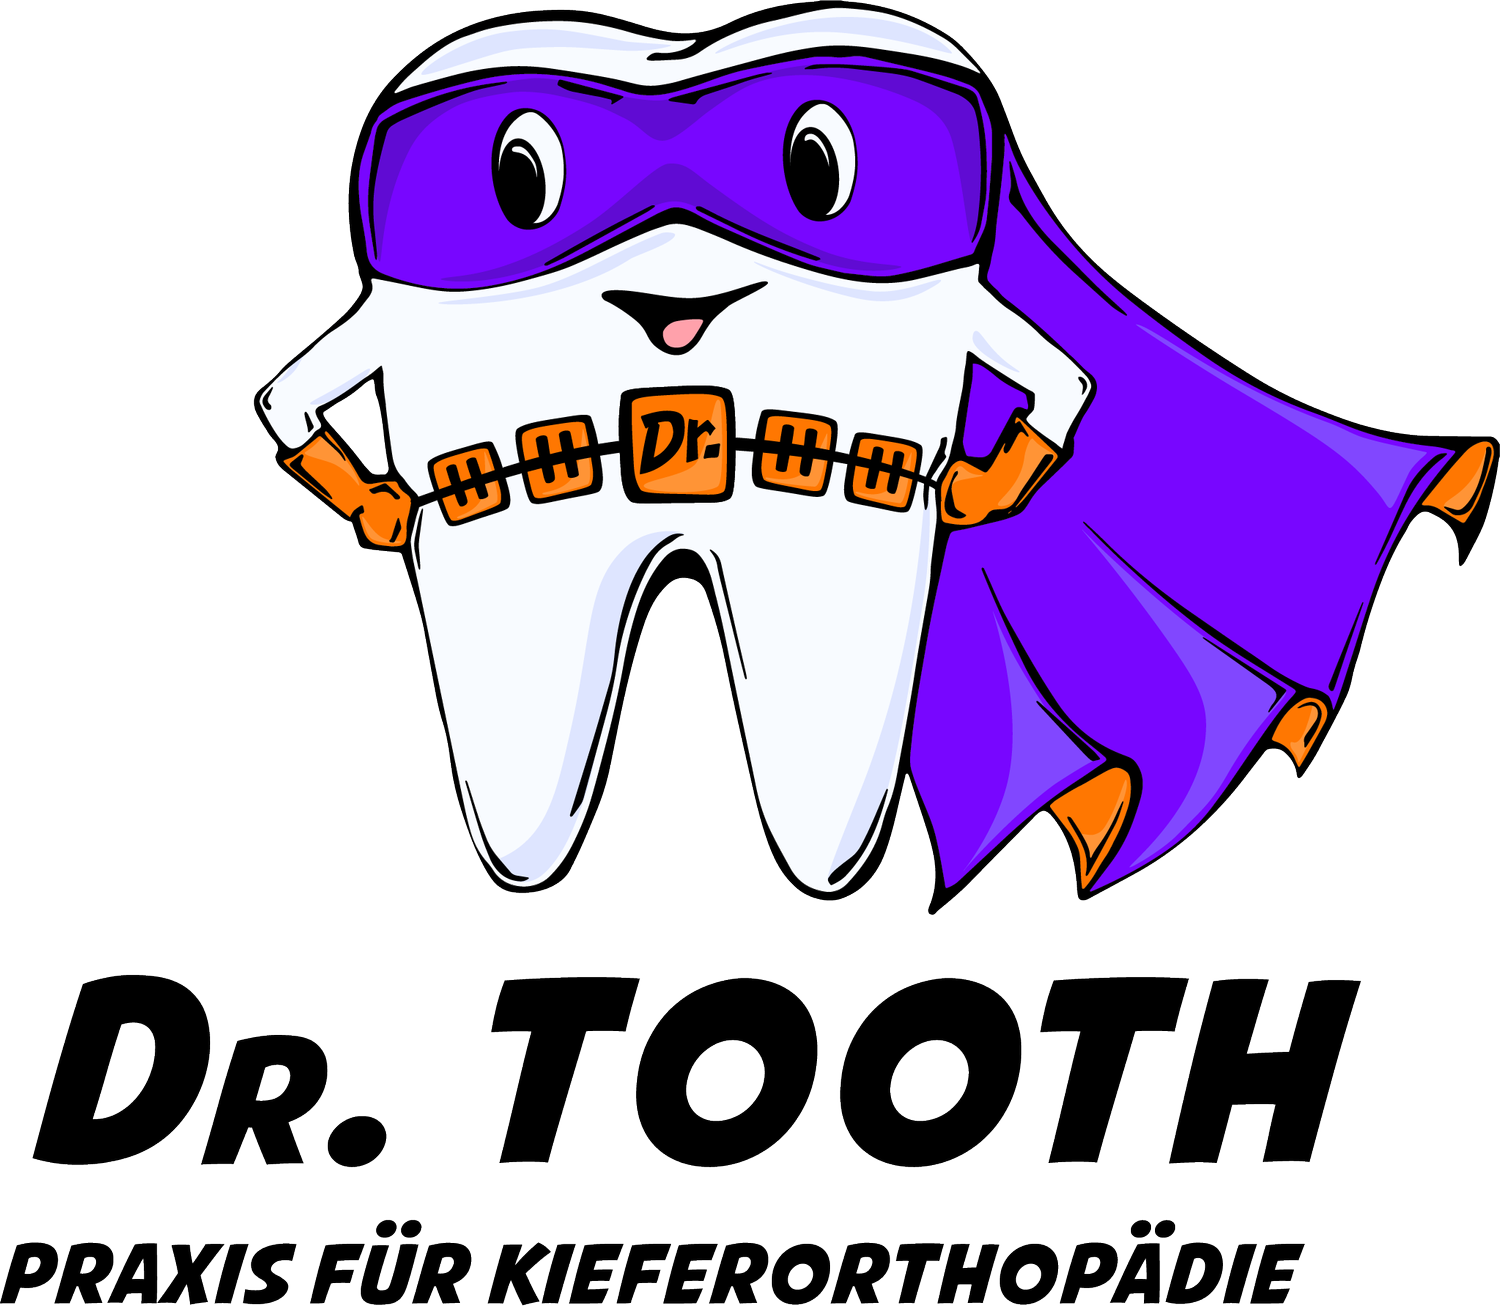 Dr. Tooth